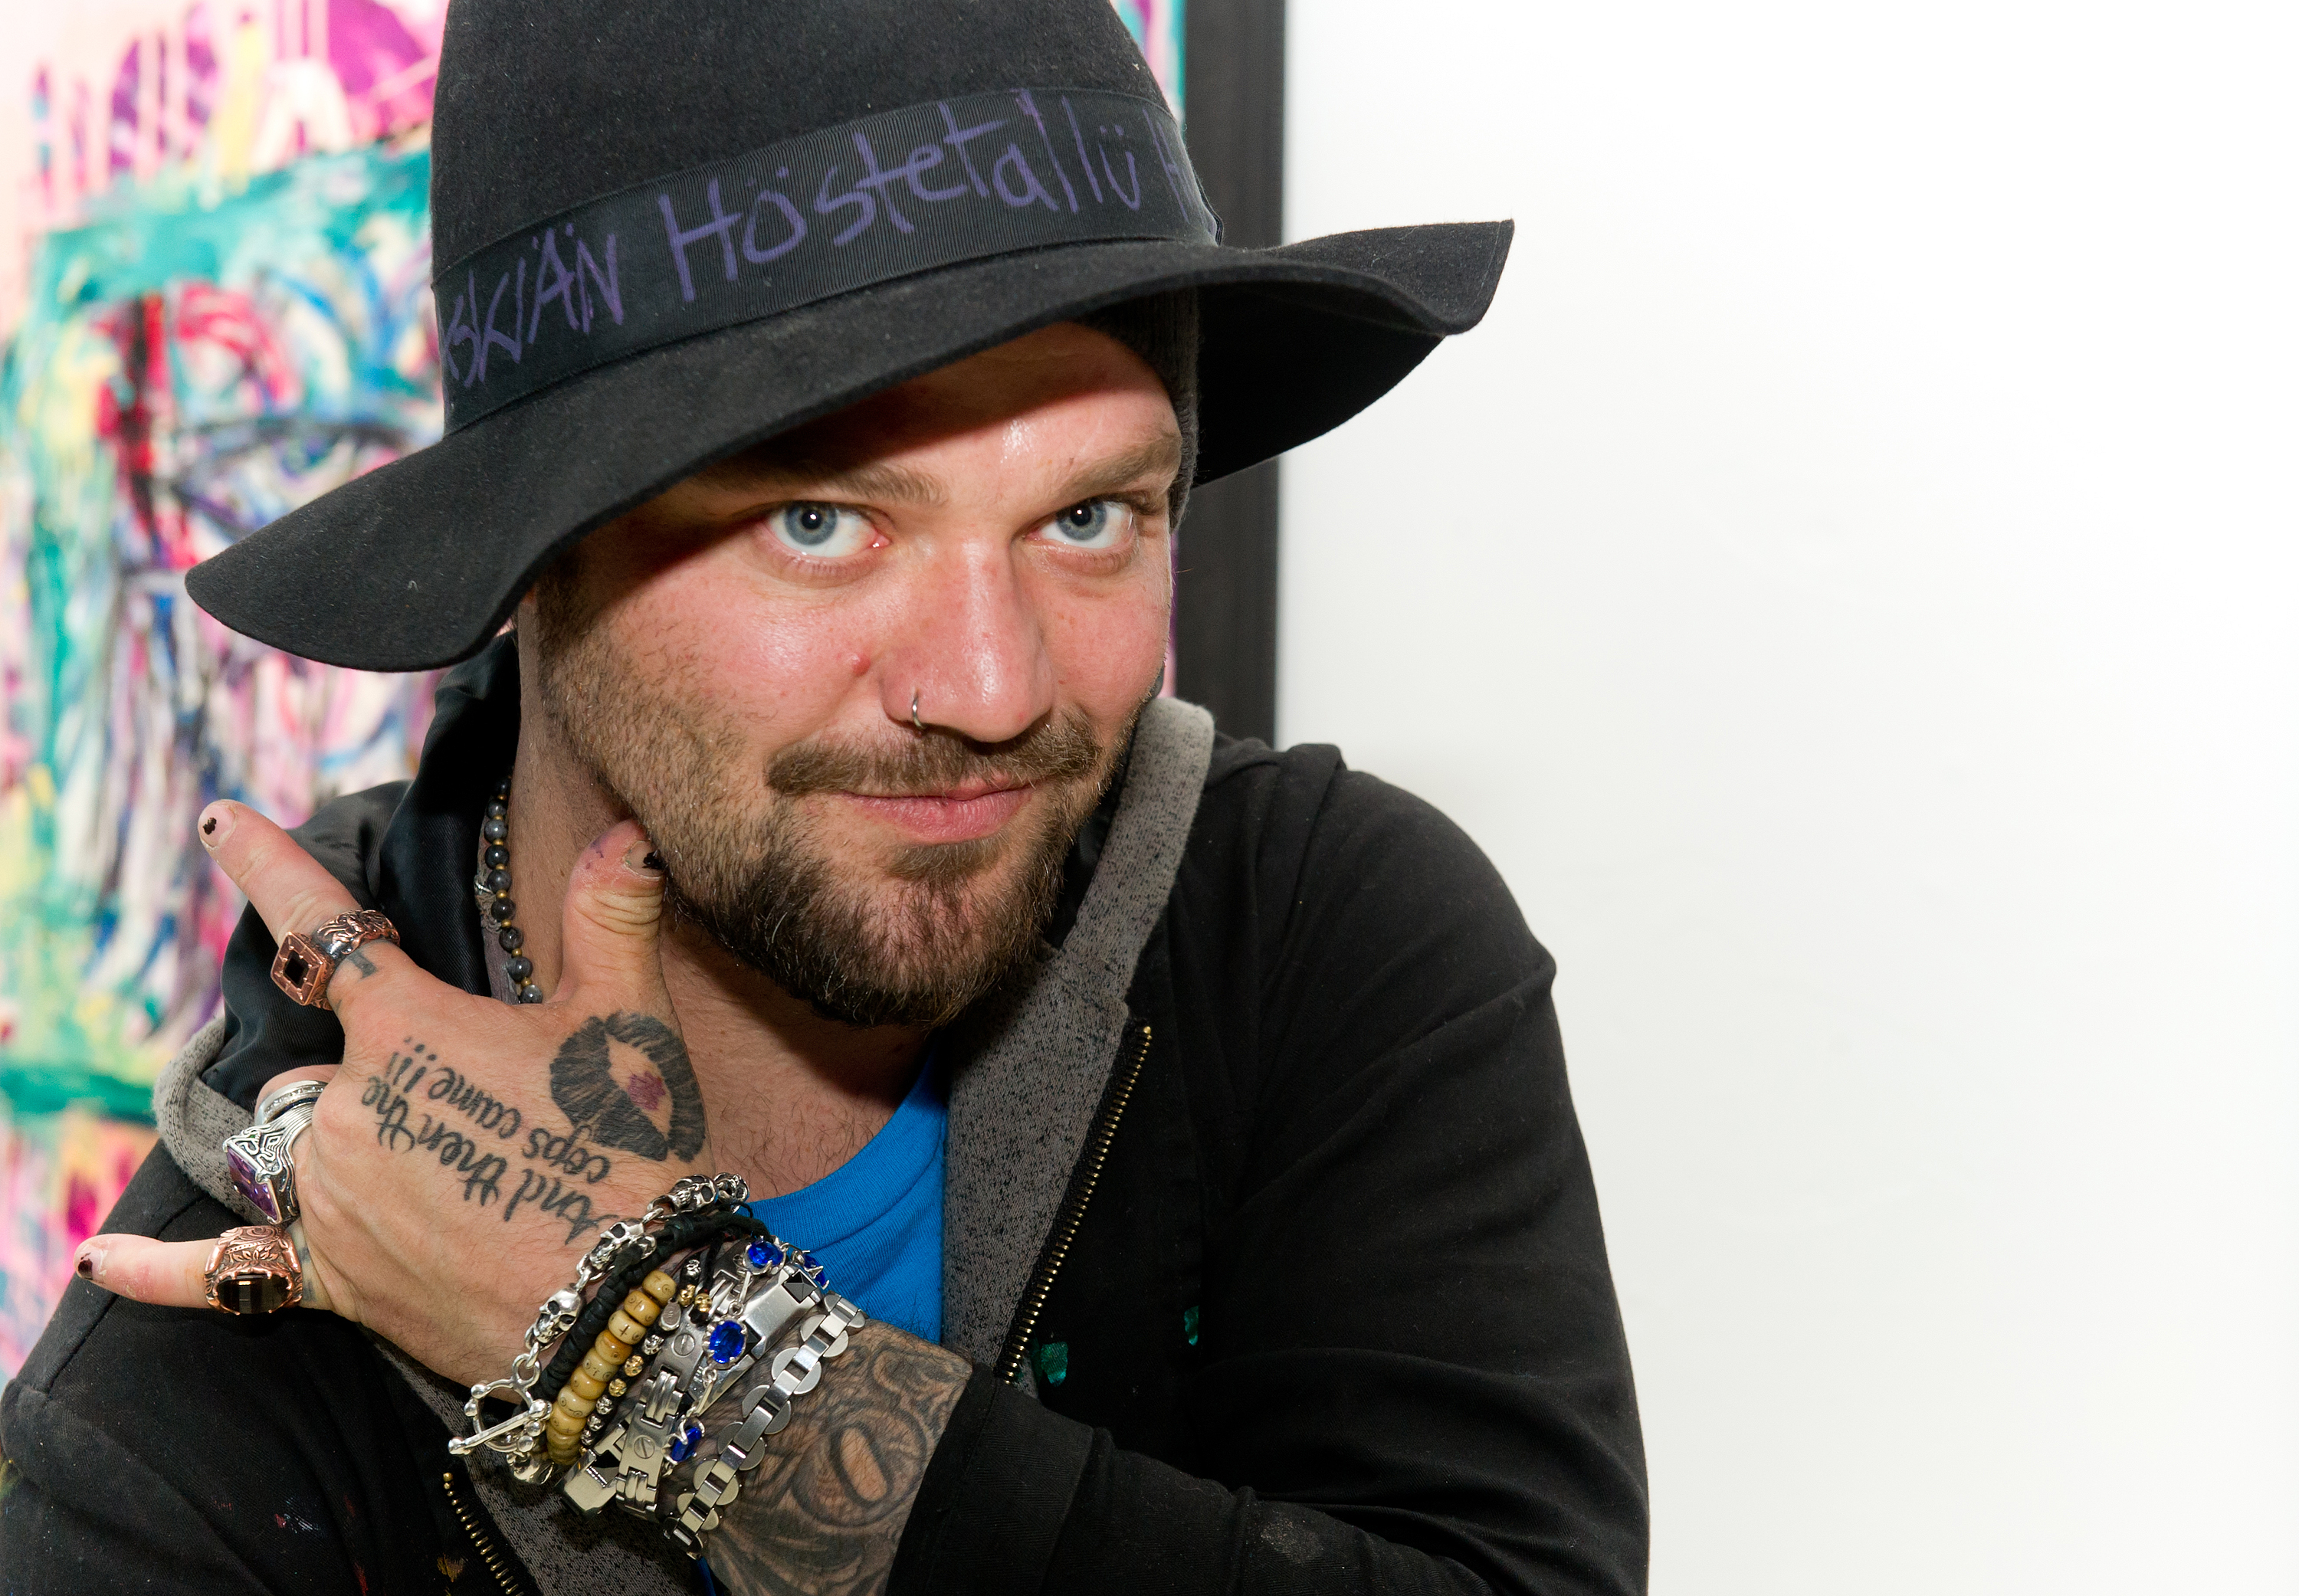 Bam margera kicked off of 'jackass 4,' couldn't abide by con...